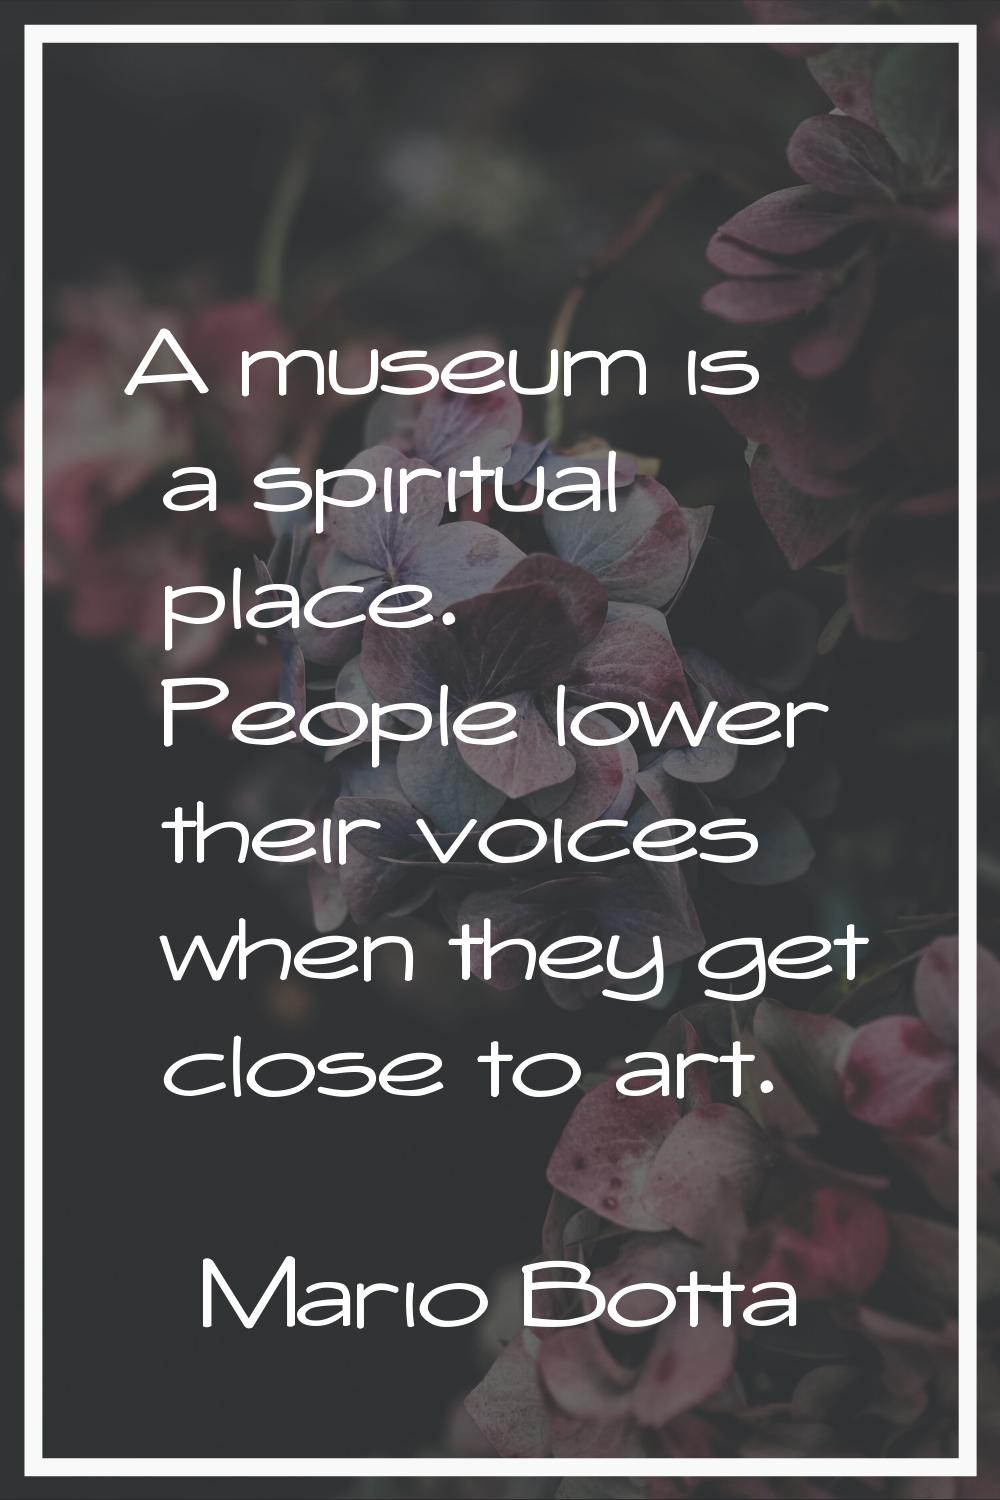 A museum is a spiritual place. People lower their voices when they get close to art.